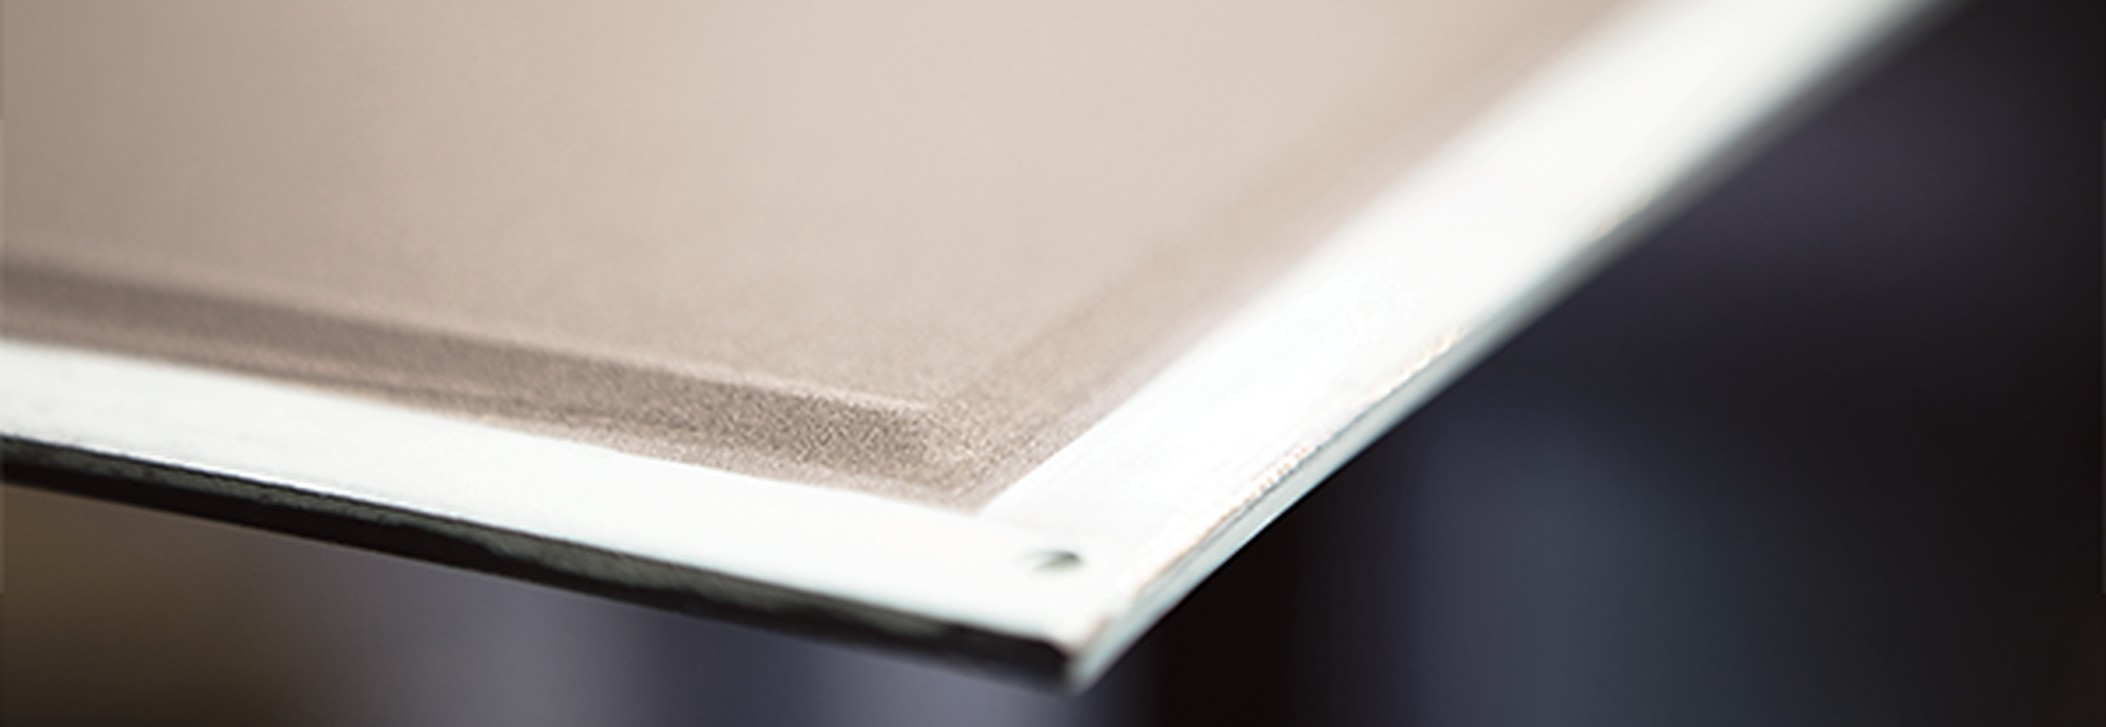 The ColWear plates are produced using proprietary nickel and cobalt alloys.